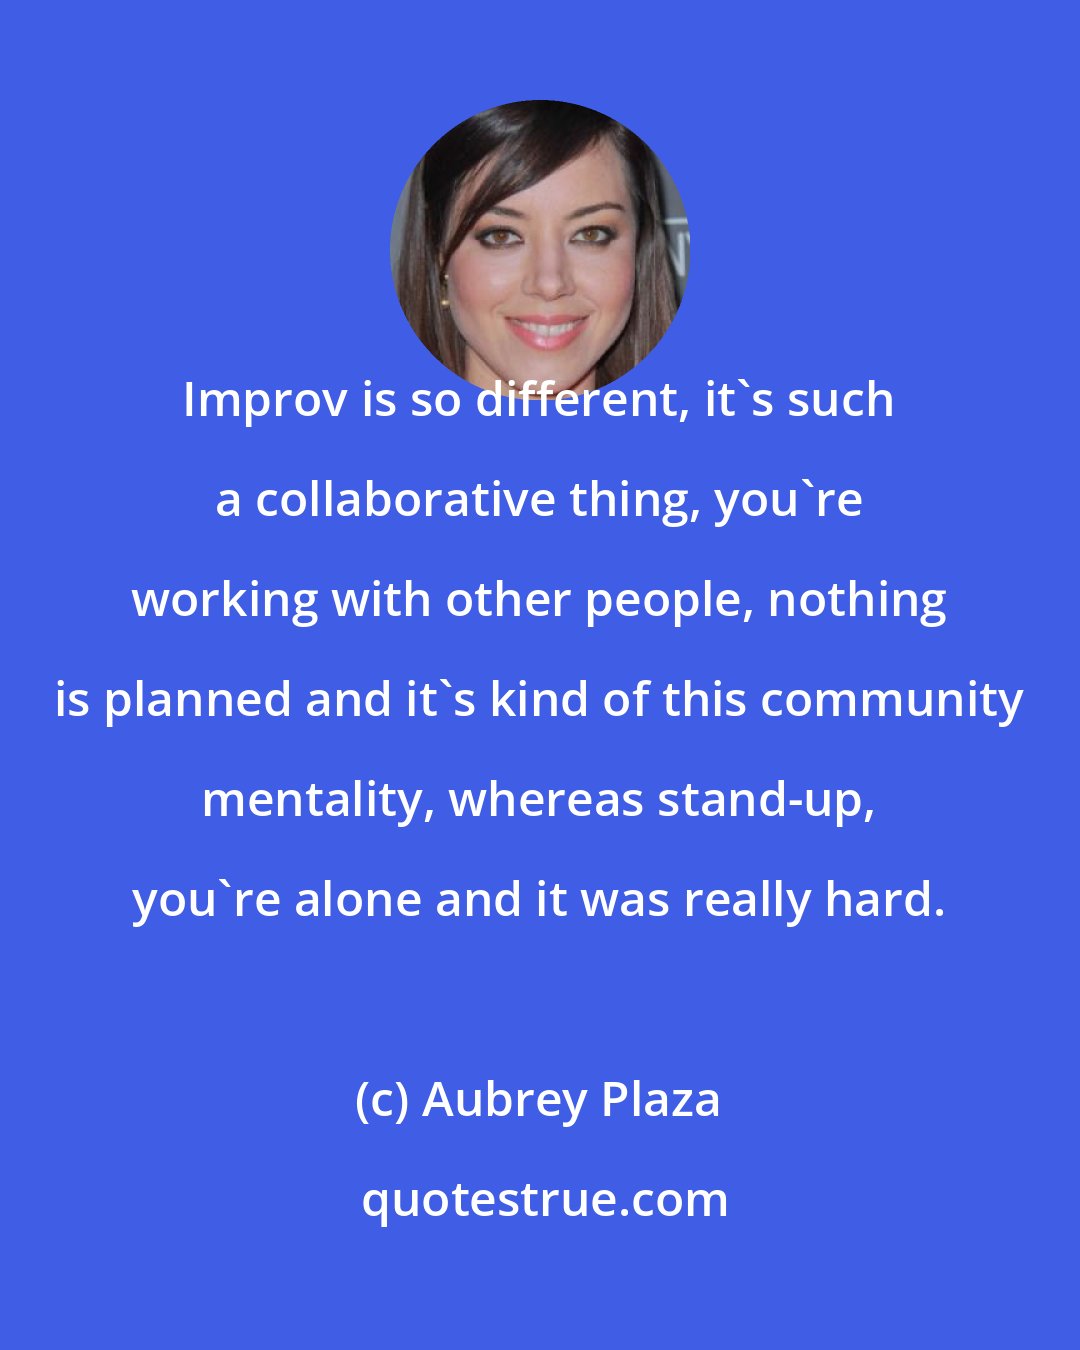 Aubrey Plaza: Improv is so different, it's such a collaborative thing, you're working with other people, nothing is planned and it's kind of this community mentality, whereas stand-up, you're alone and it was really hard.